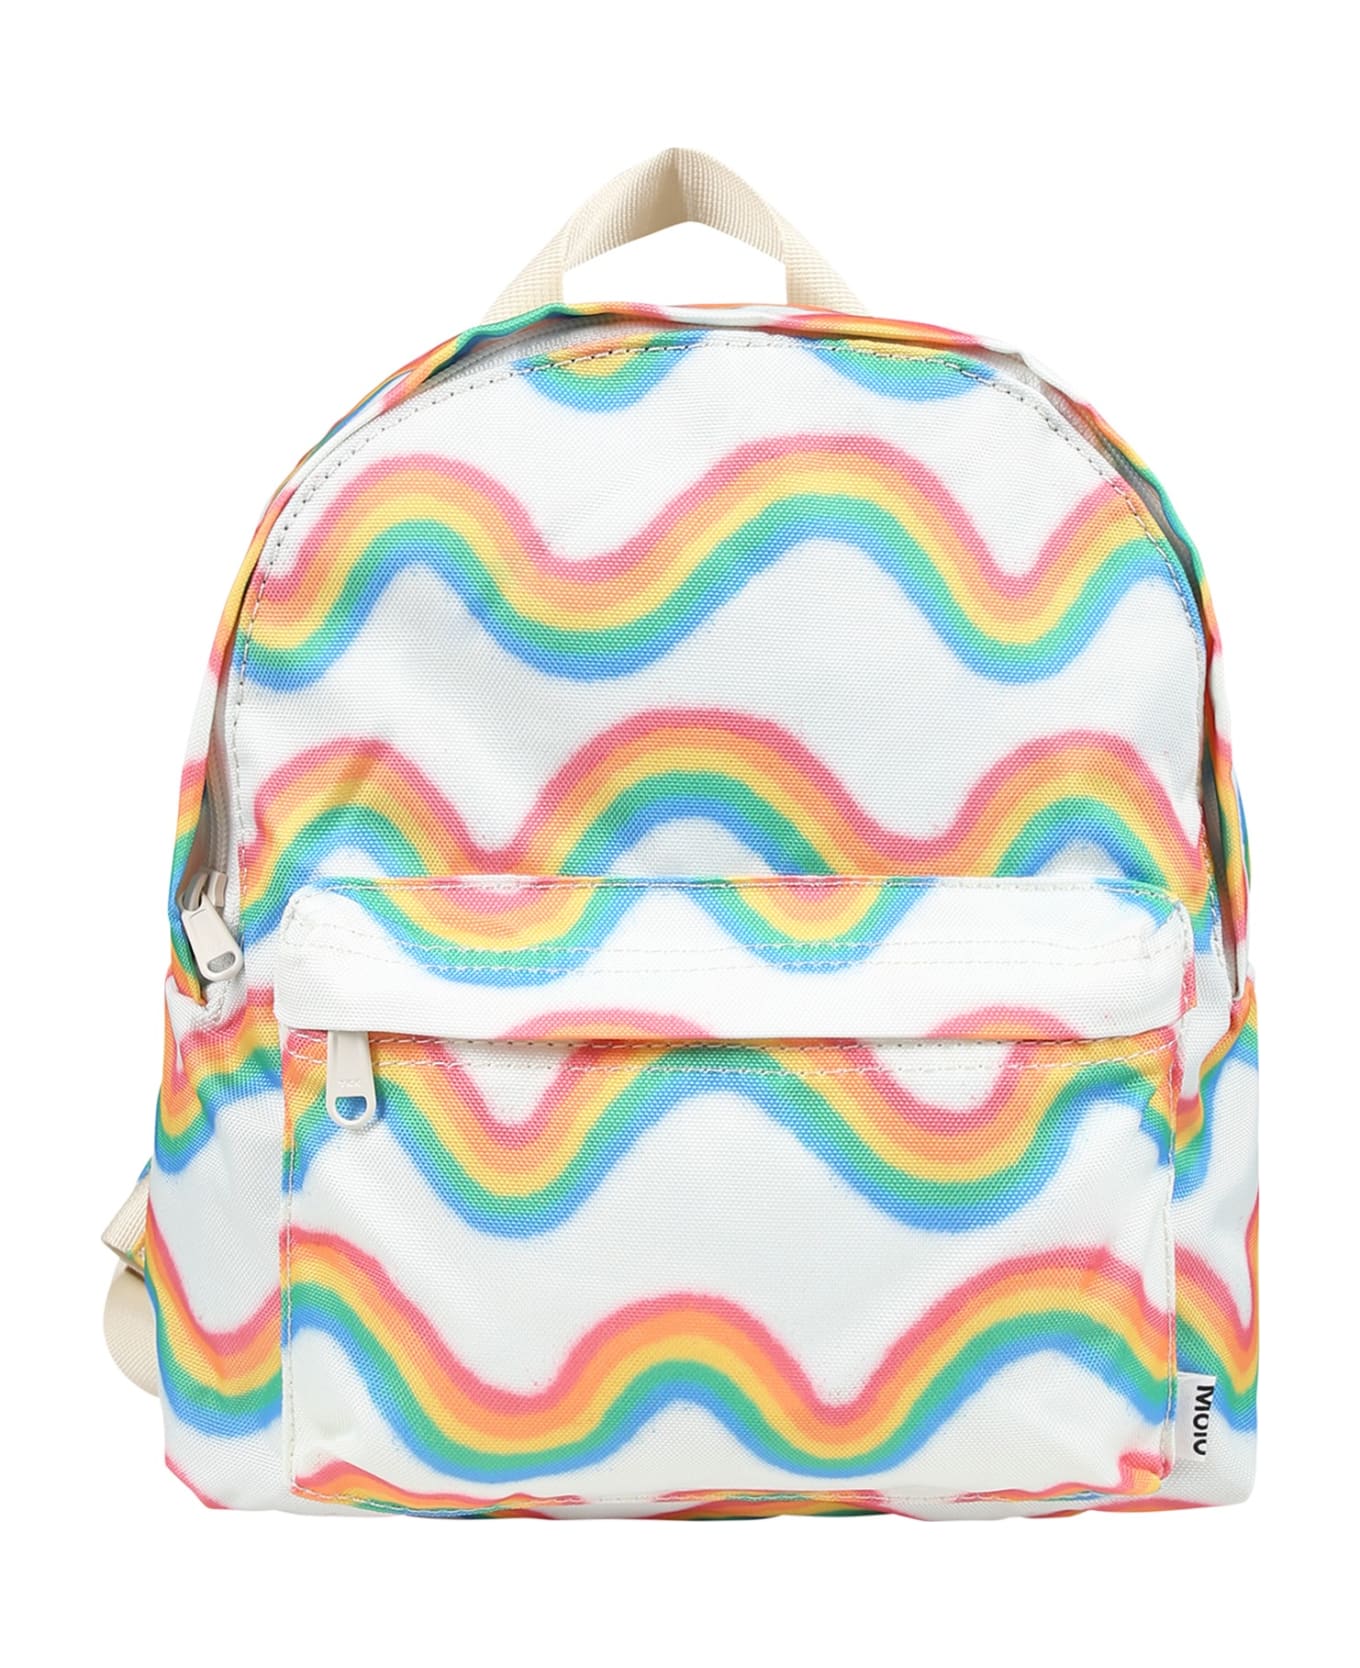 Molo White Backpack For Kids With Rainbow Print - Multicolor アクセサリー＆ギフト